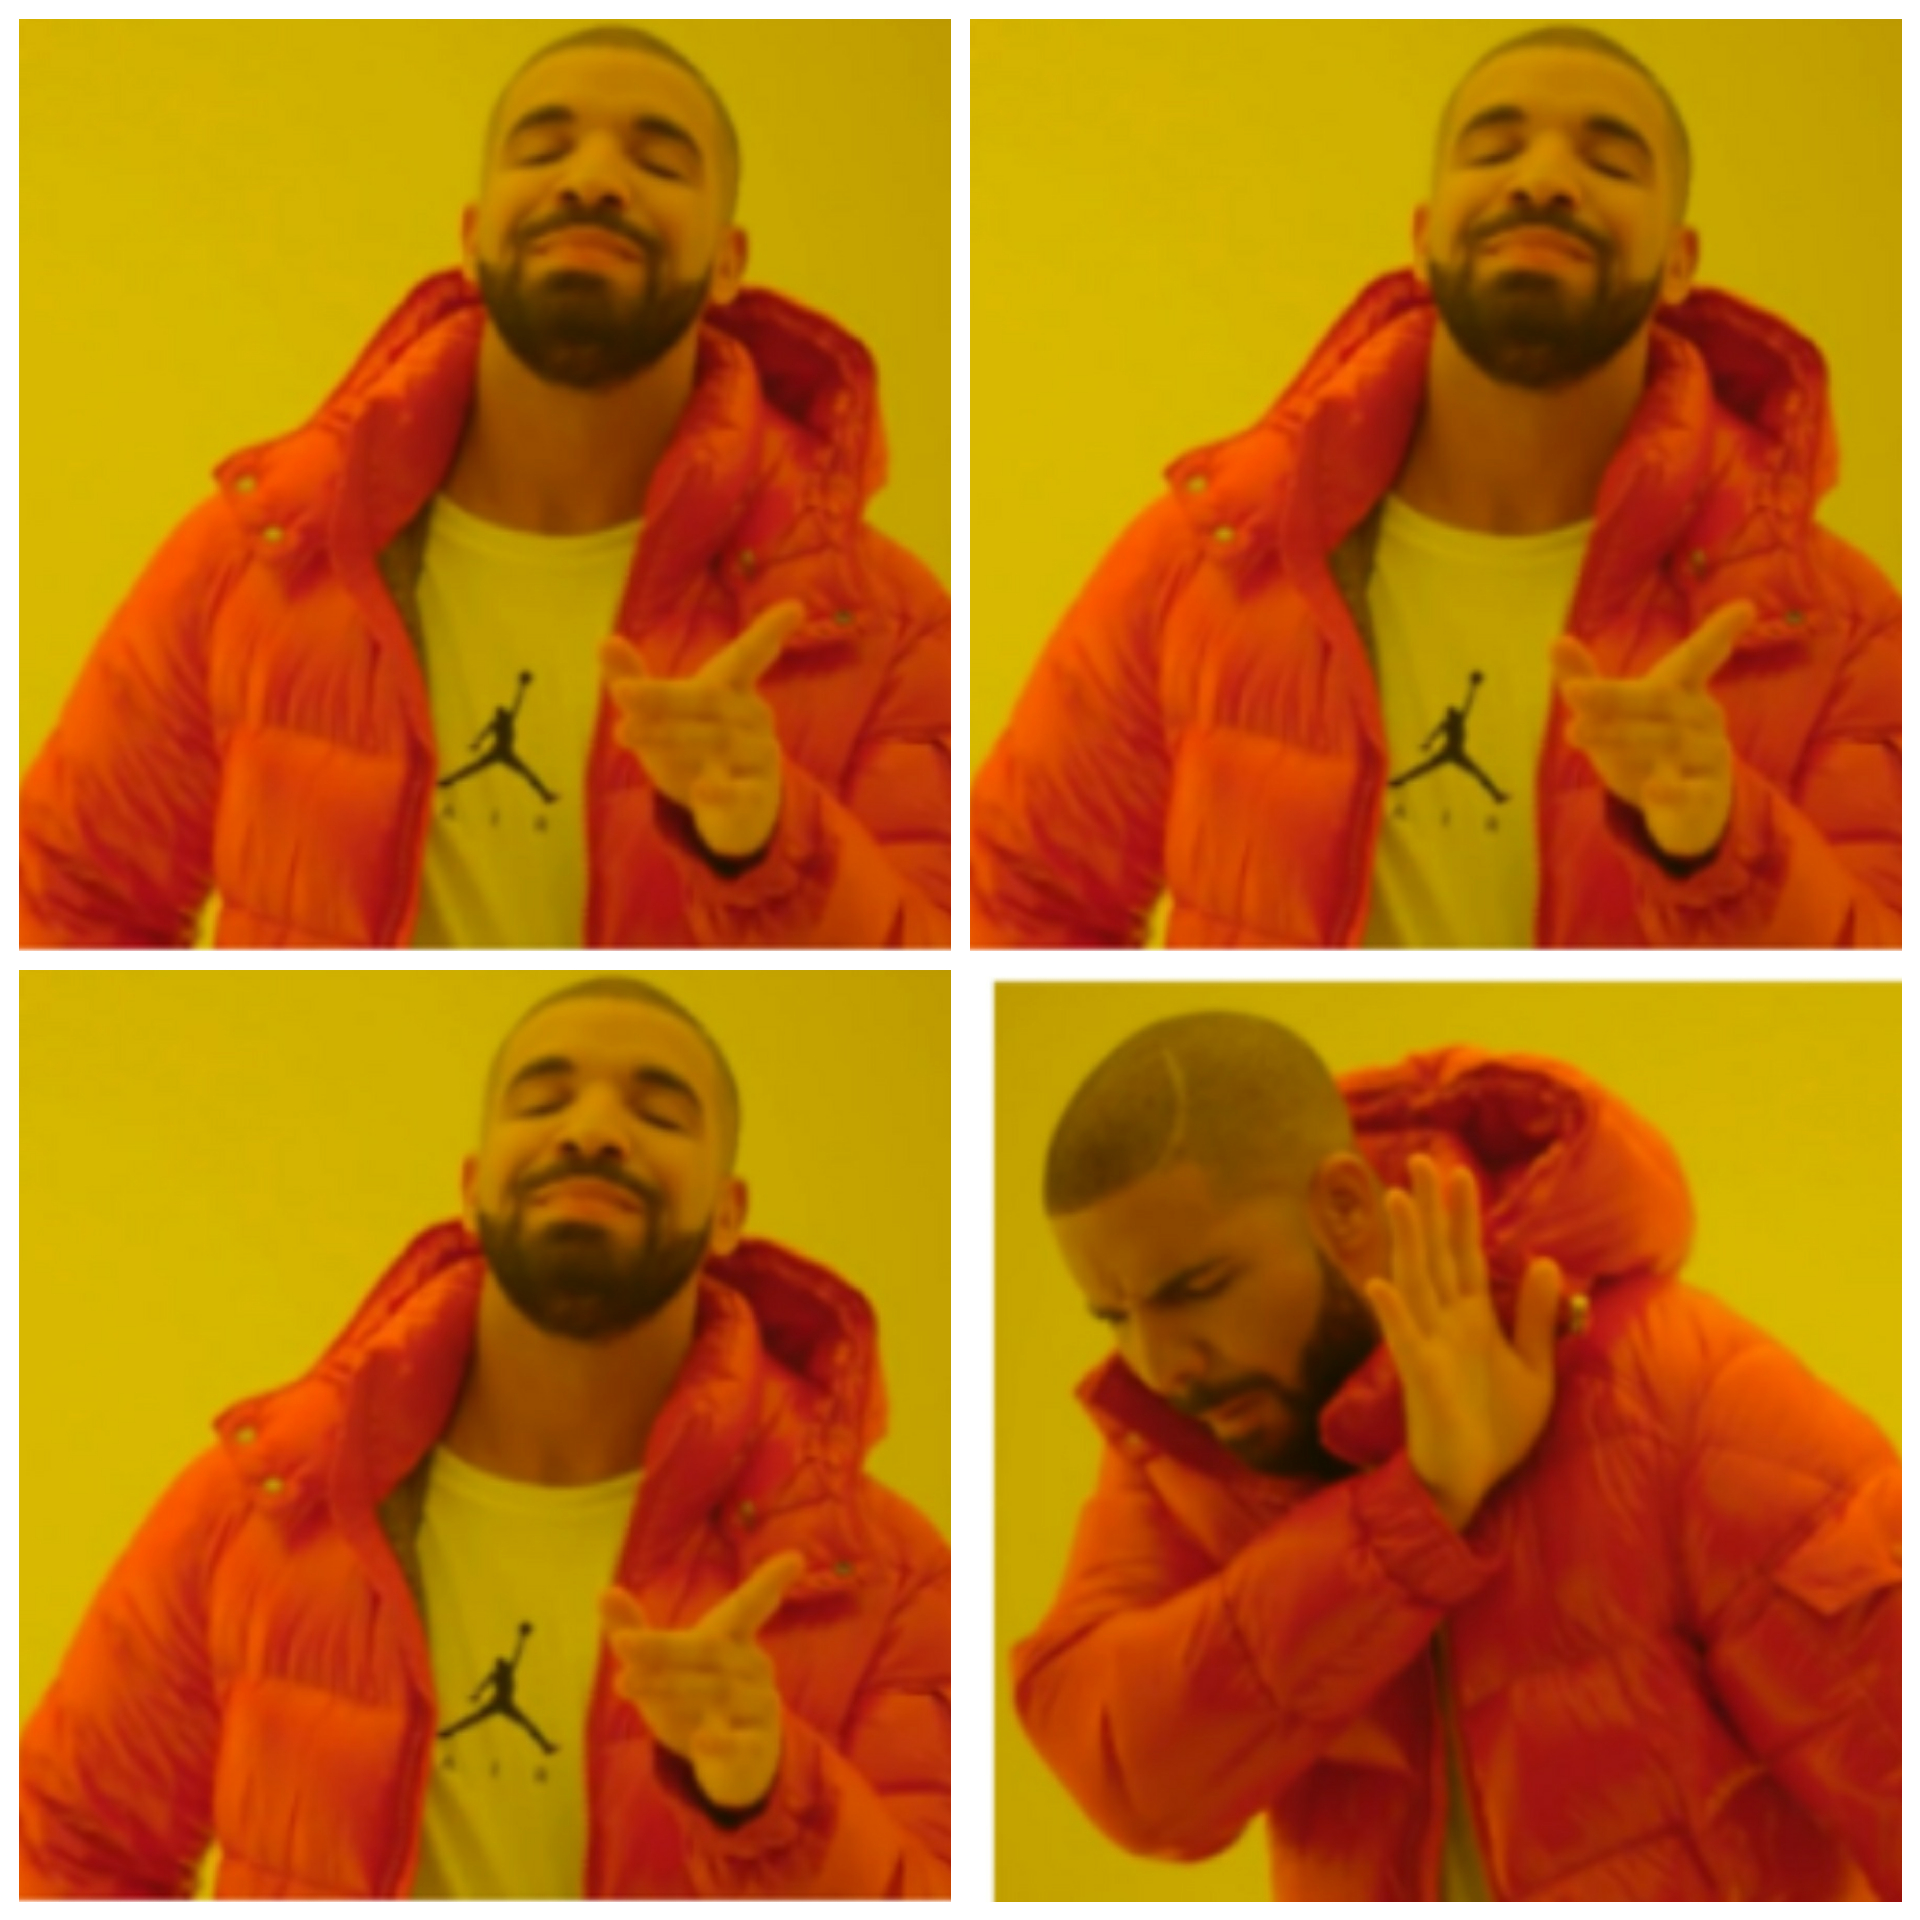 New Use for the Drake Meme Template - Imgflip